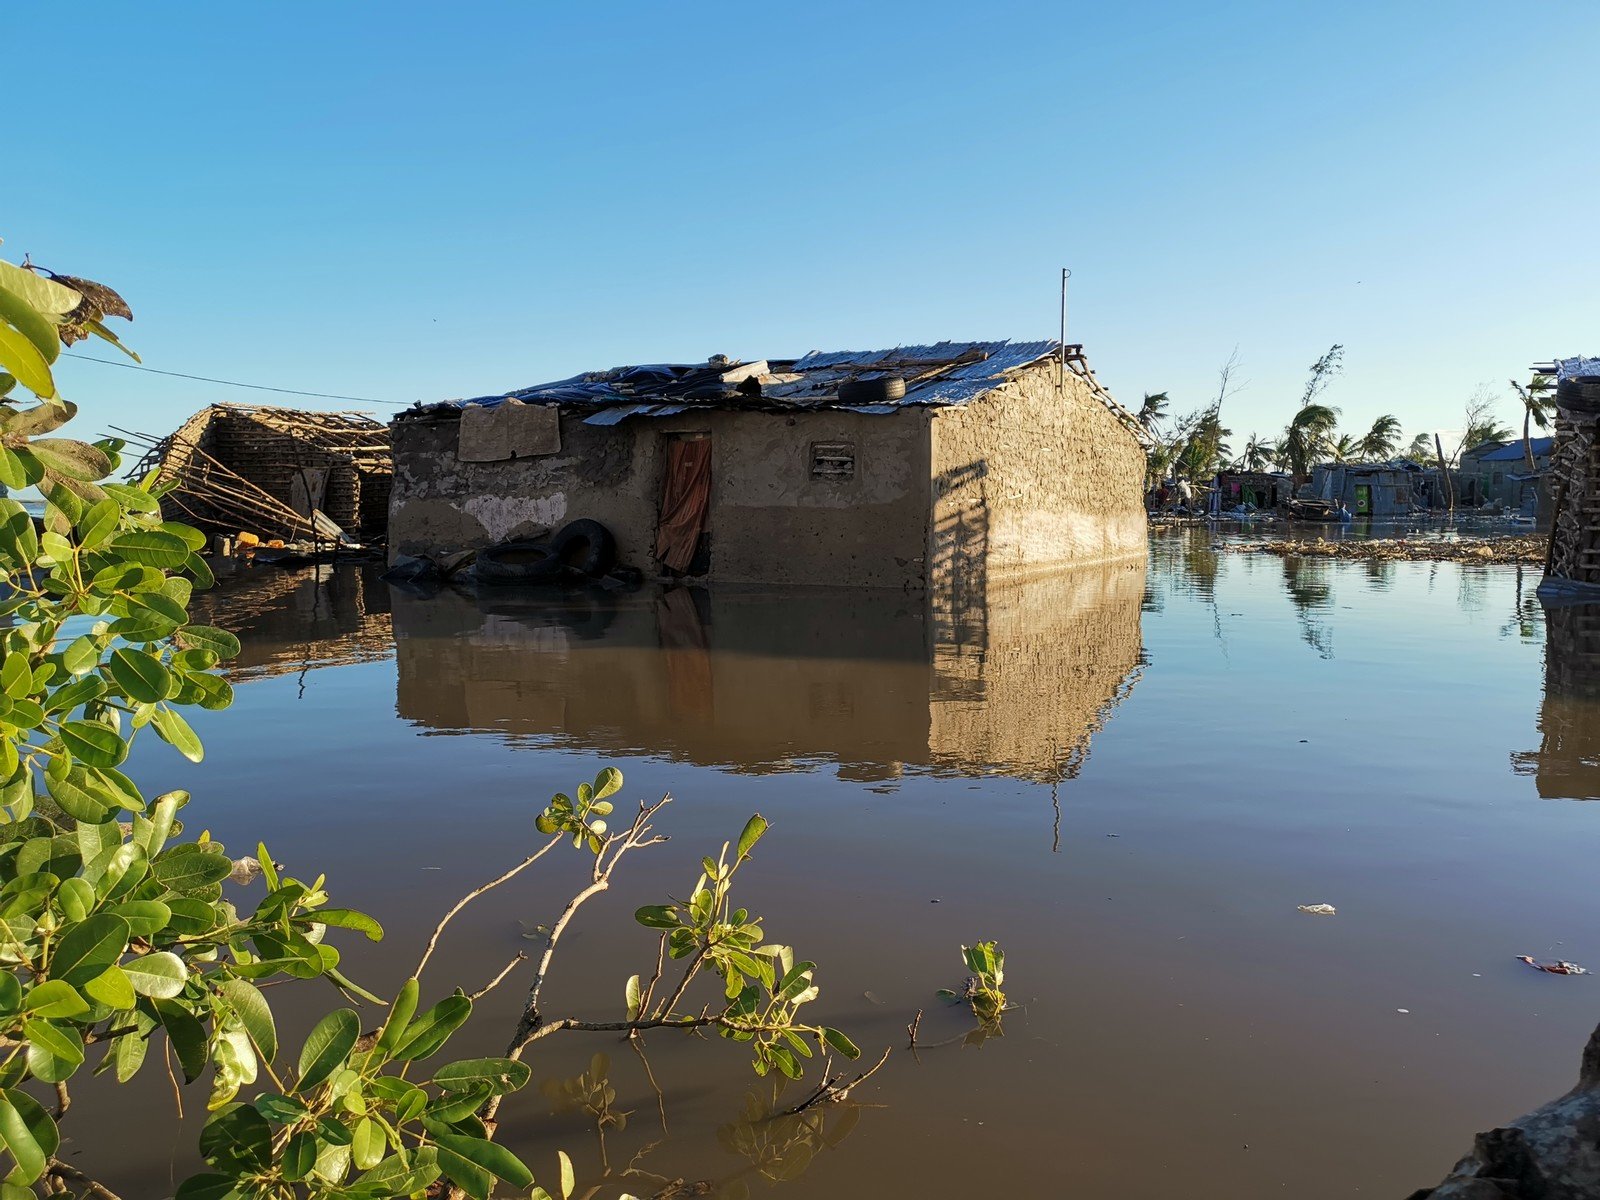 A house flooded and damaged by Cyclone Idai in Mozambique. (Photo: Sergio Zimba/Oxfam)